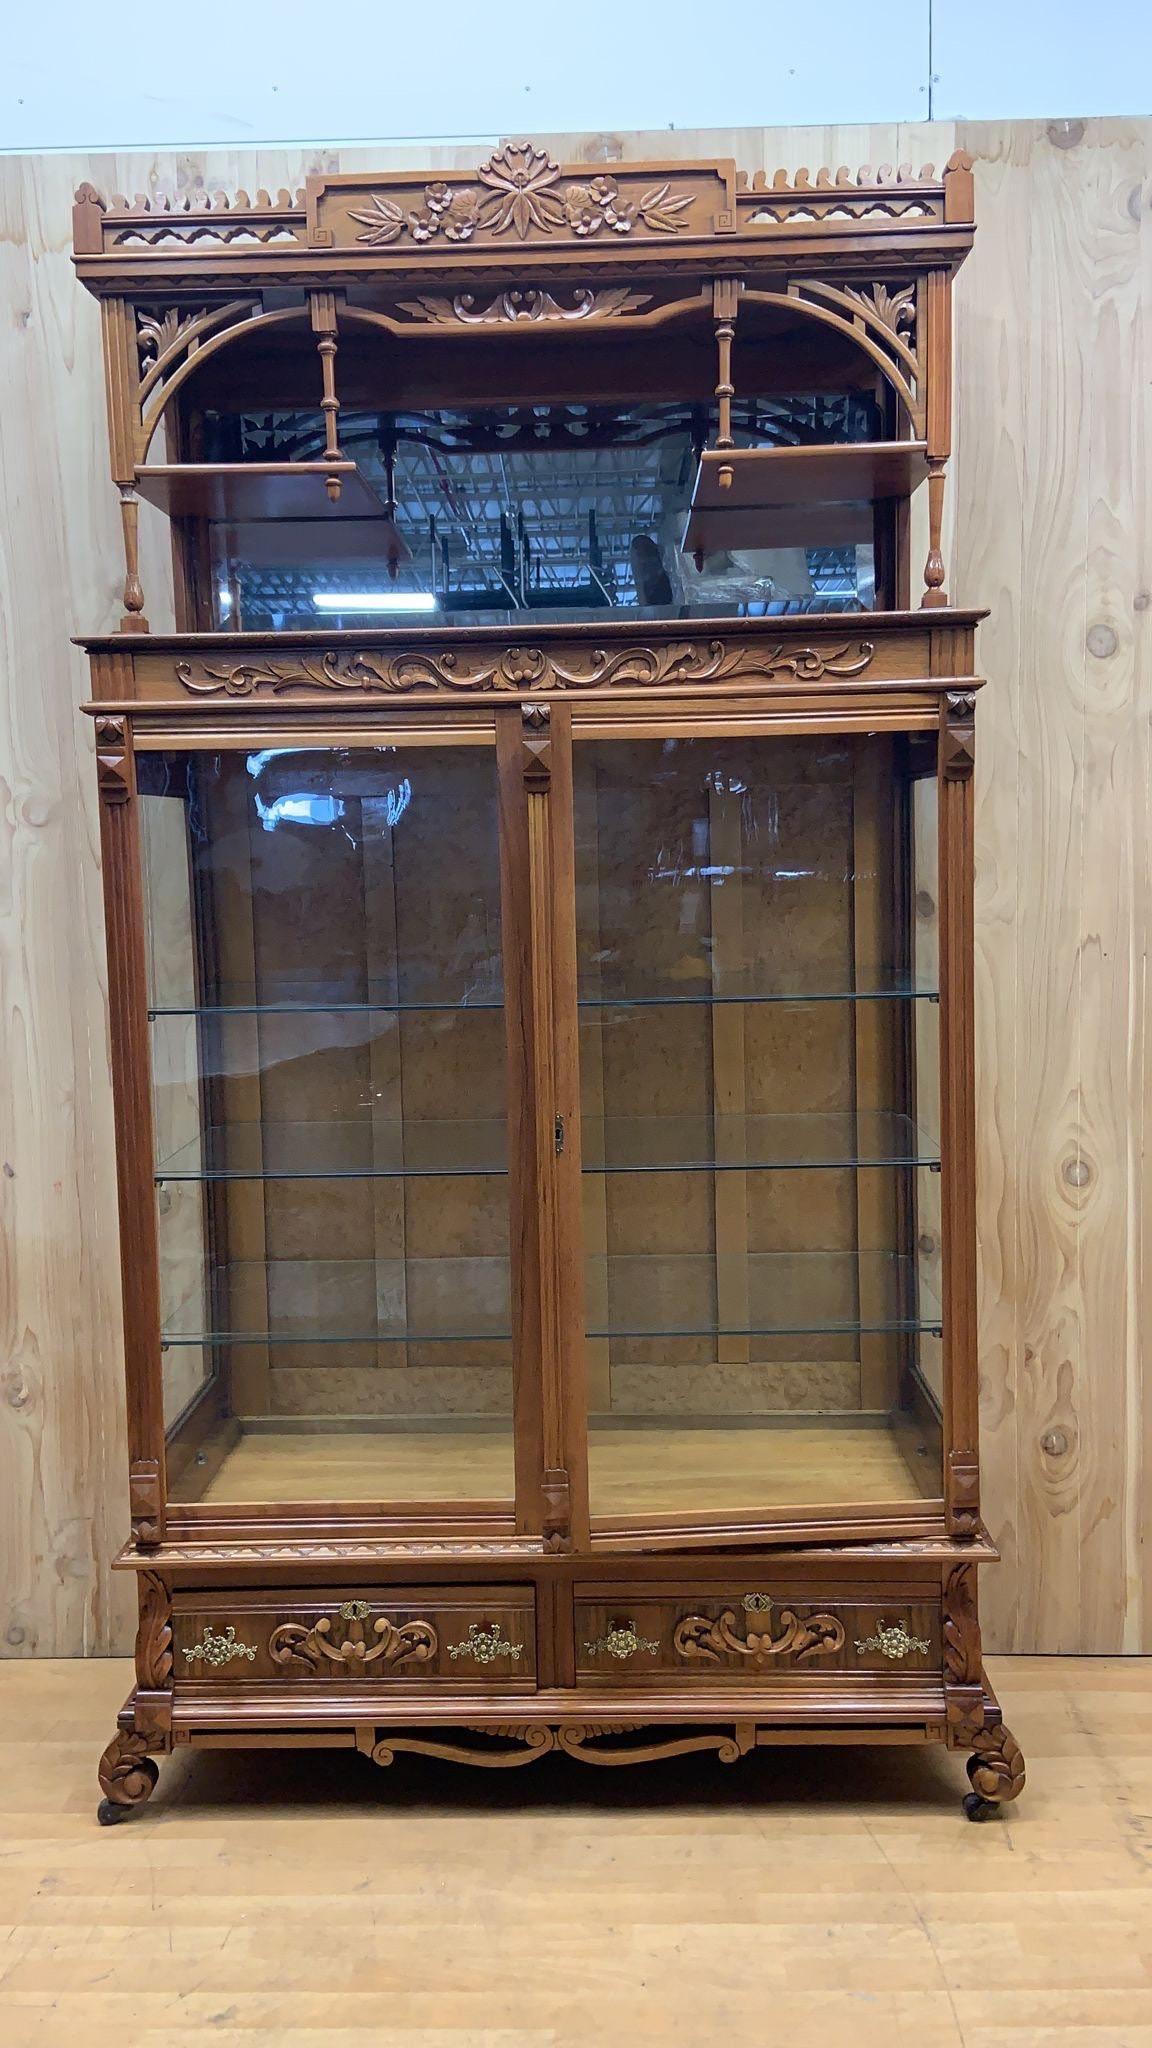 Antique Eastlake Ornate Carved Walnut Double Glass-Door Bookcase/Display cabinet

Exquisite 19th Century Tall, Victorian, Finely Carved & Detailed Double Glass-Door Front Eastlake Bookcase/Display Cabinet. This Gorgeous Piece Features 3 Glass